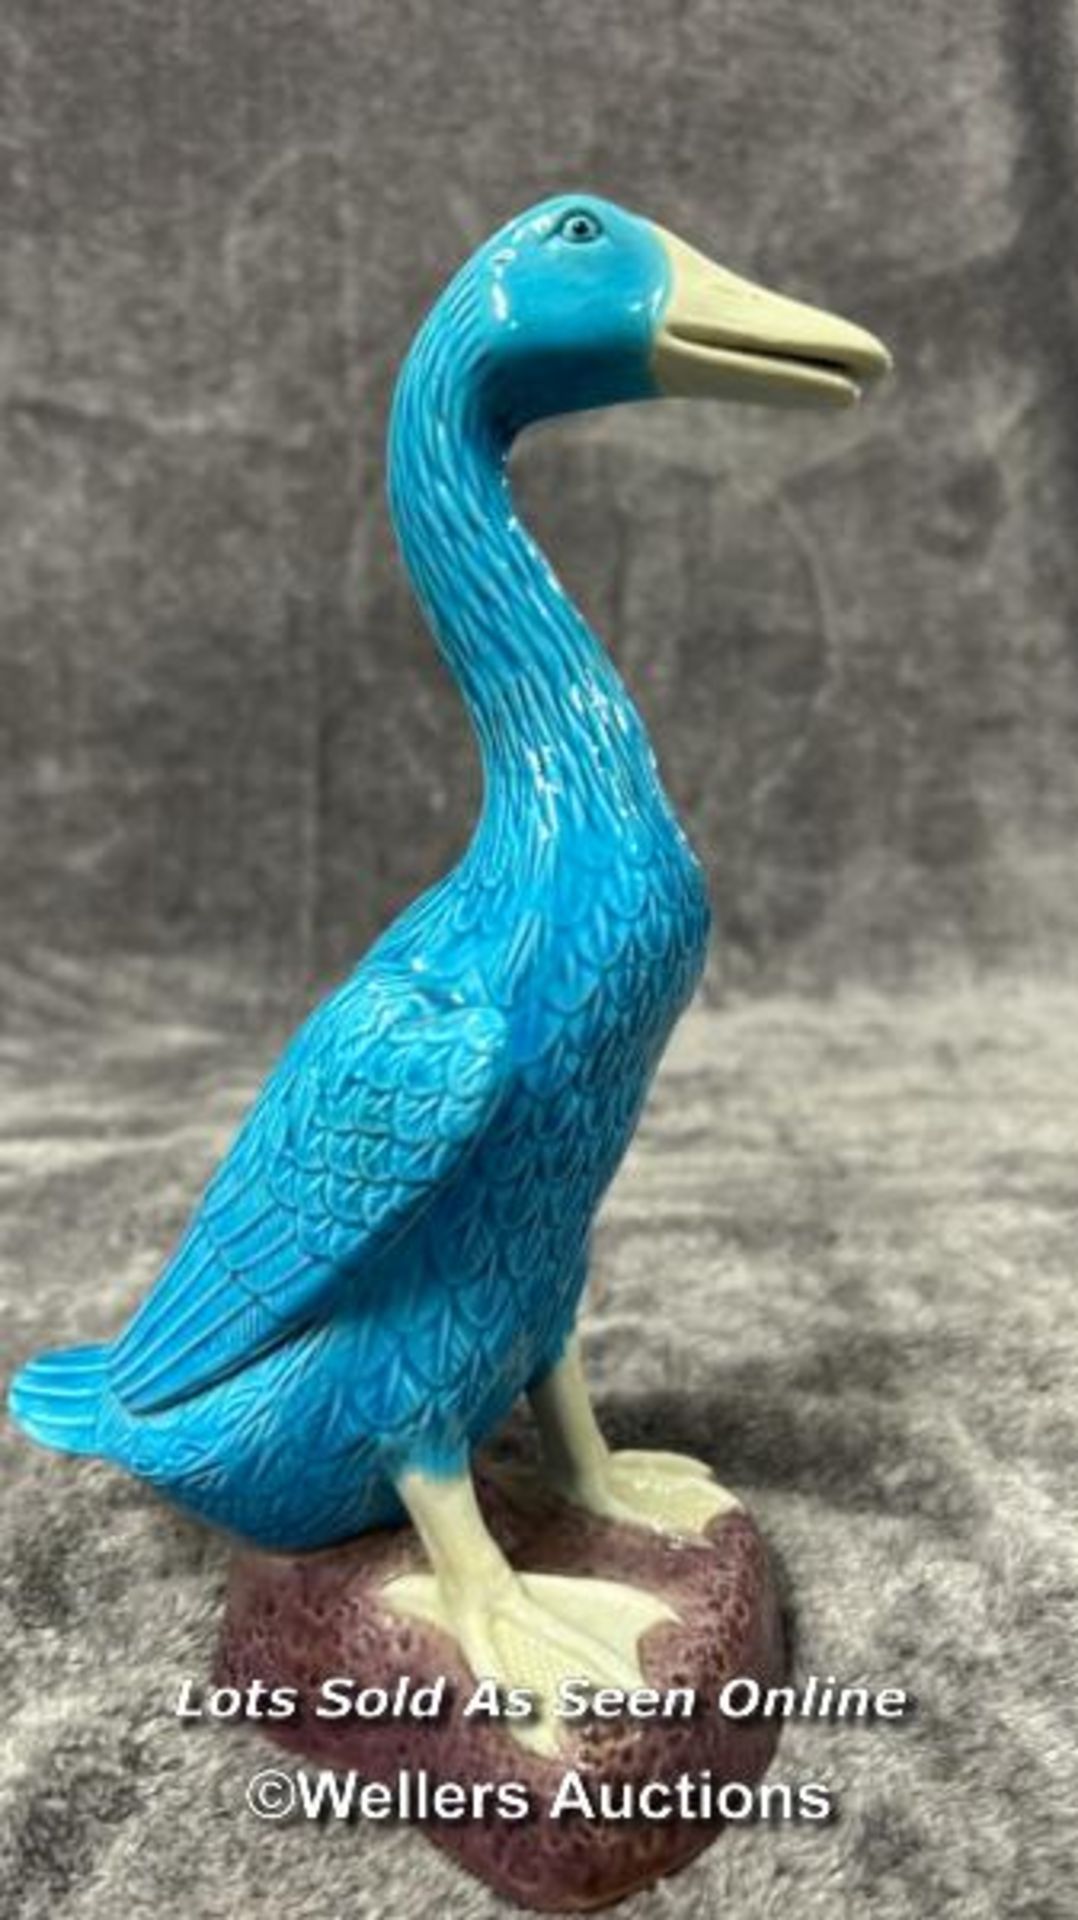 Set of six Chinese turquoise glazed porcelain duck figures, the tallest 29cm high / AN6 - Image 12 of 17